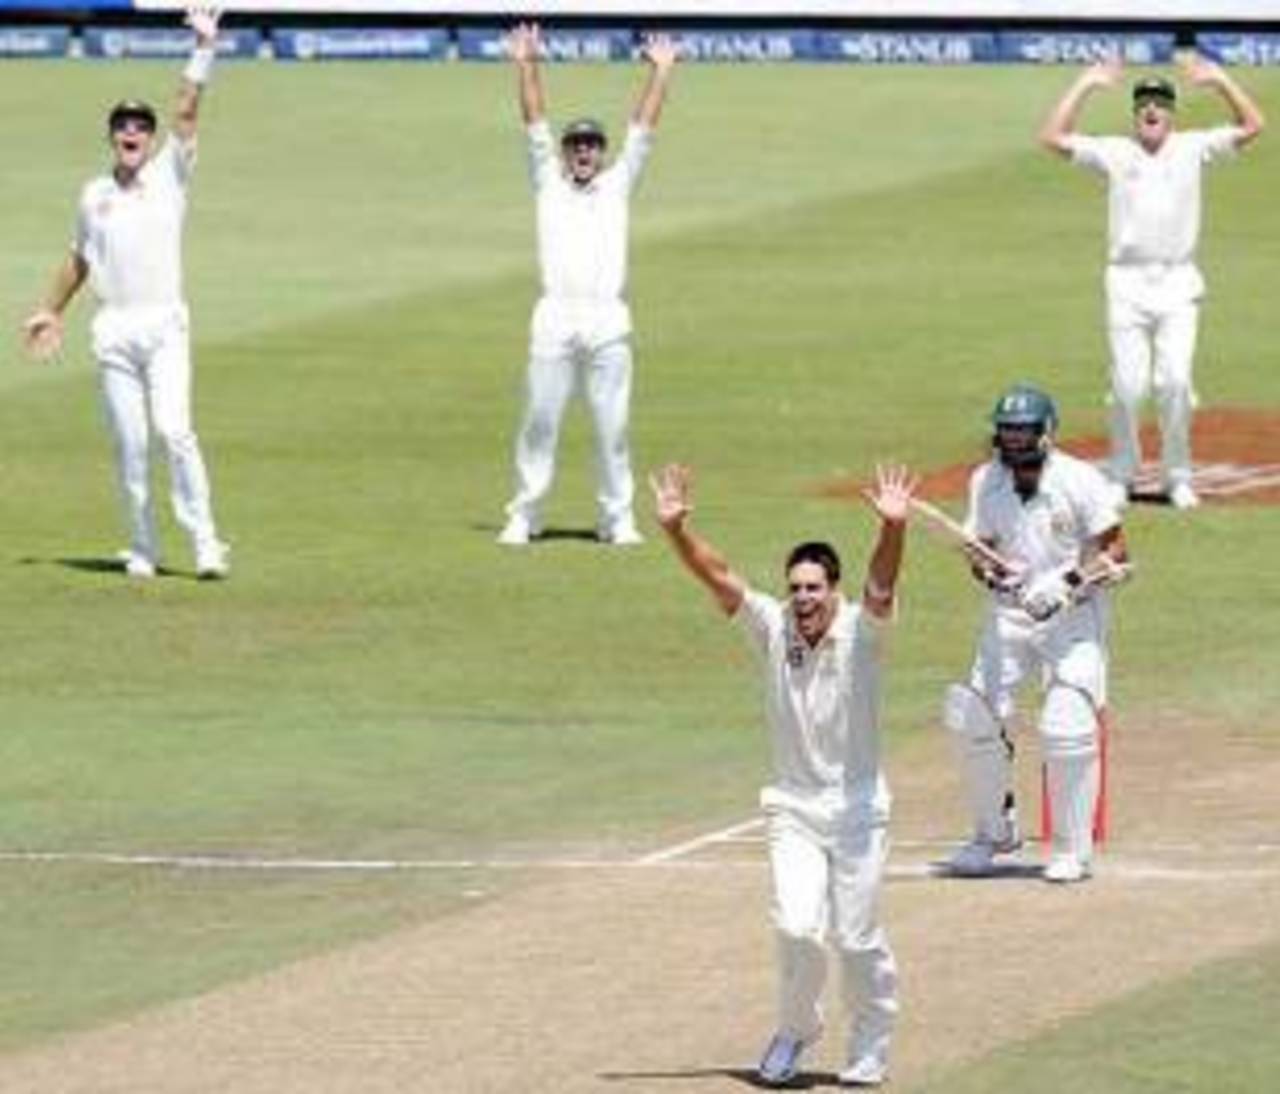 Mitchell Johnson picked up 33 wickets at 25.45 in his last six Tests against South Africa&nbsp;&nbsp;&bull;&nbsp;&nbsp;Getty Images